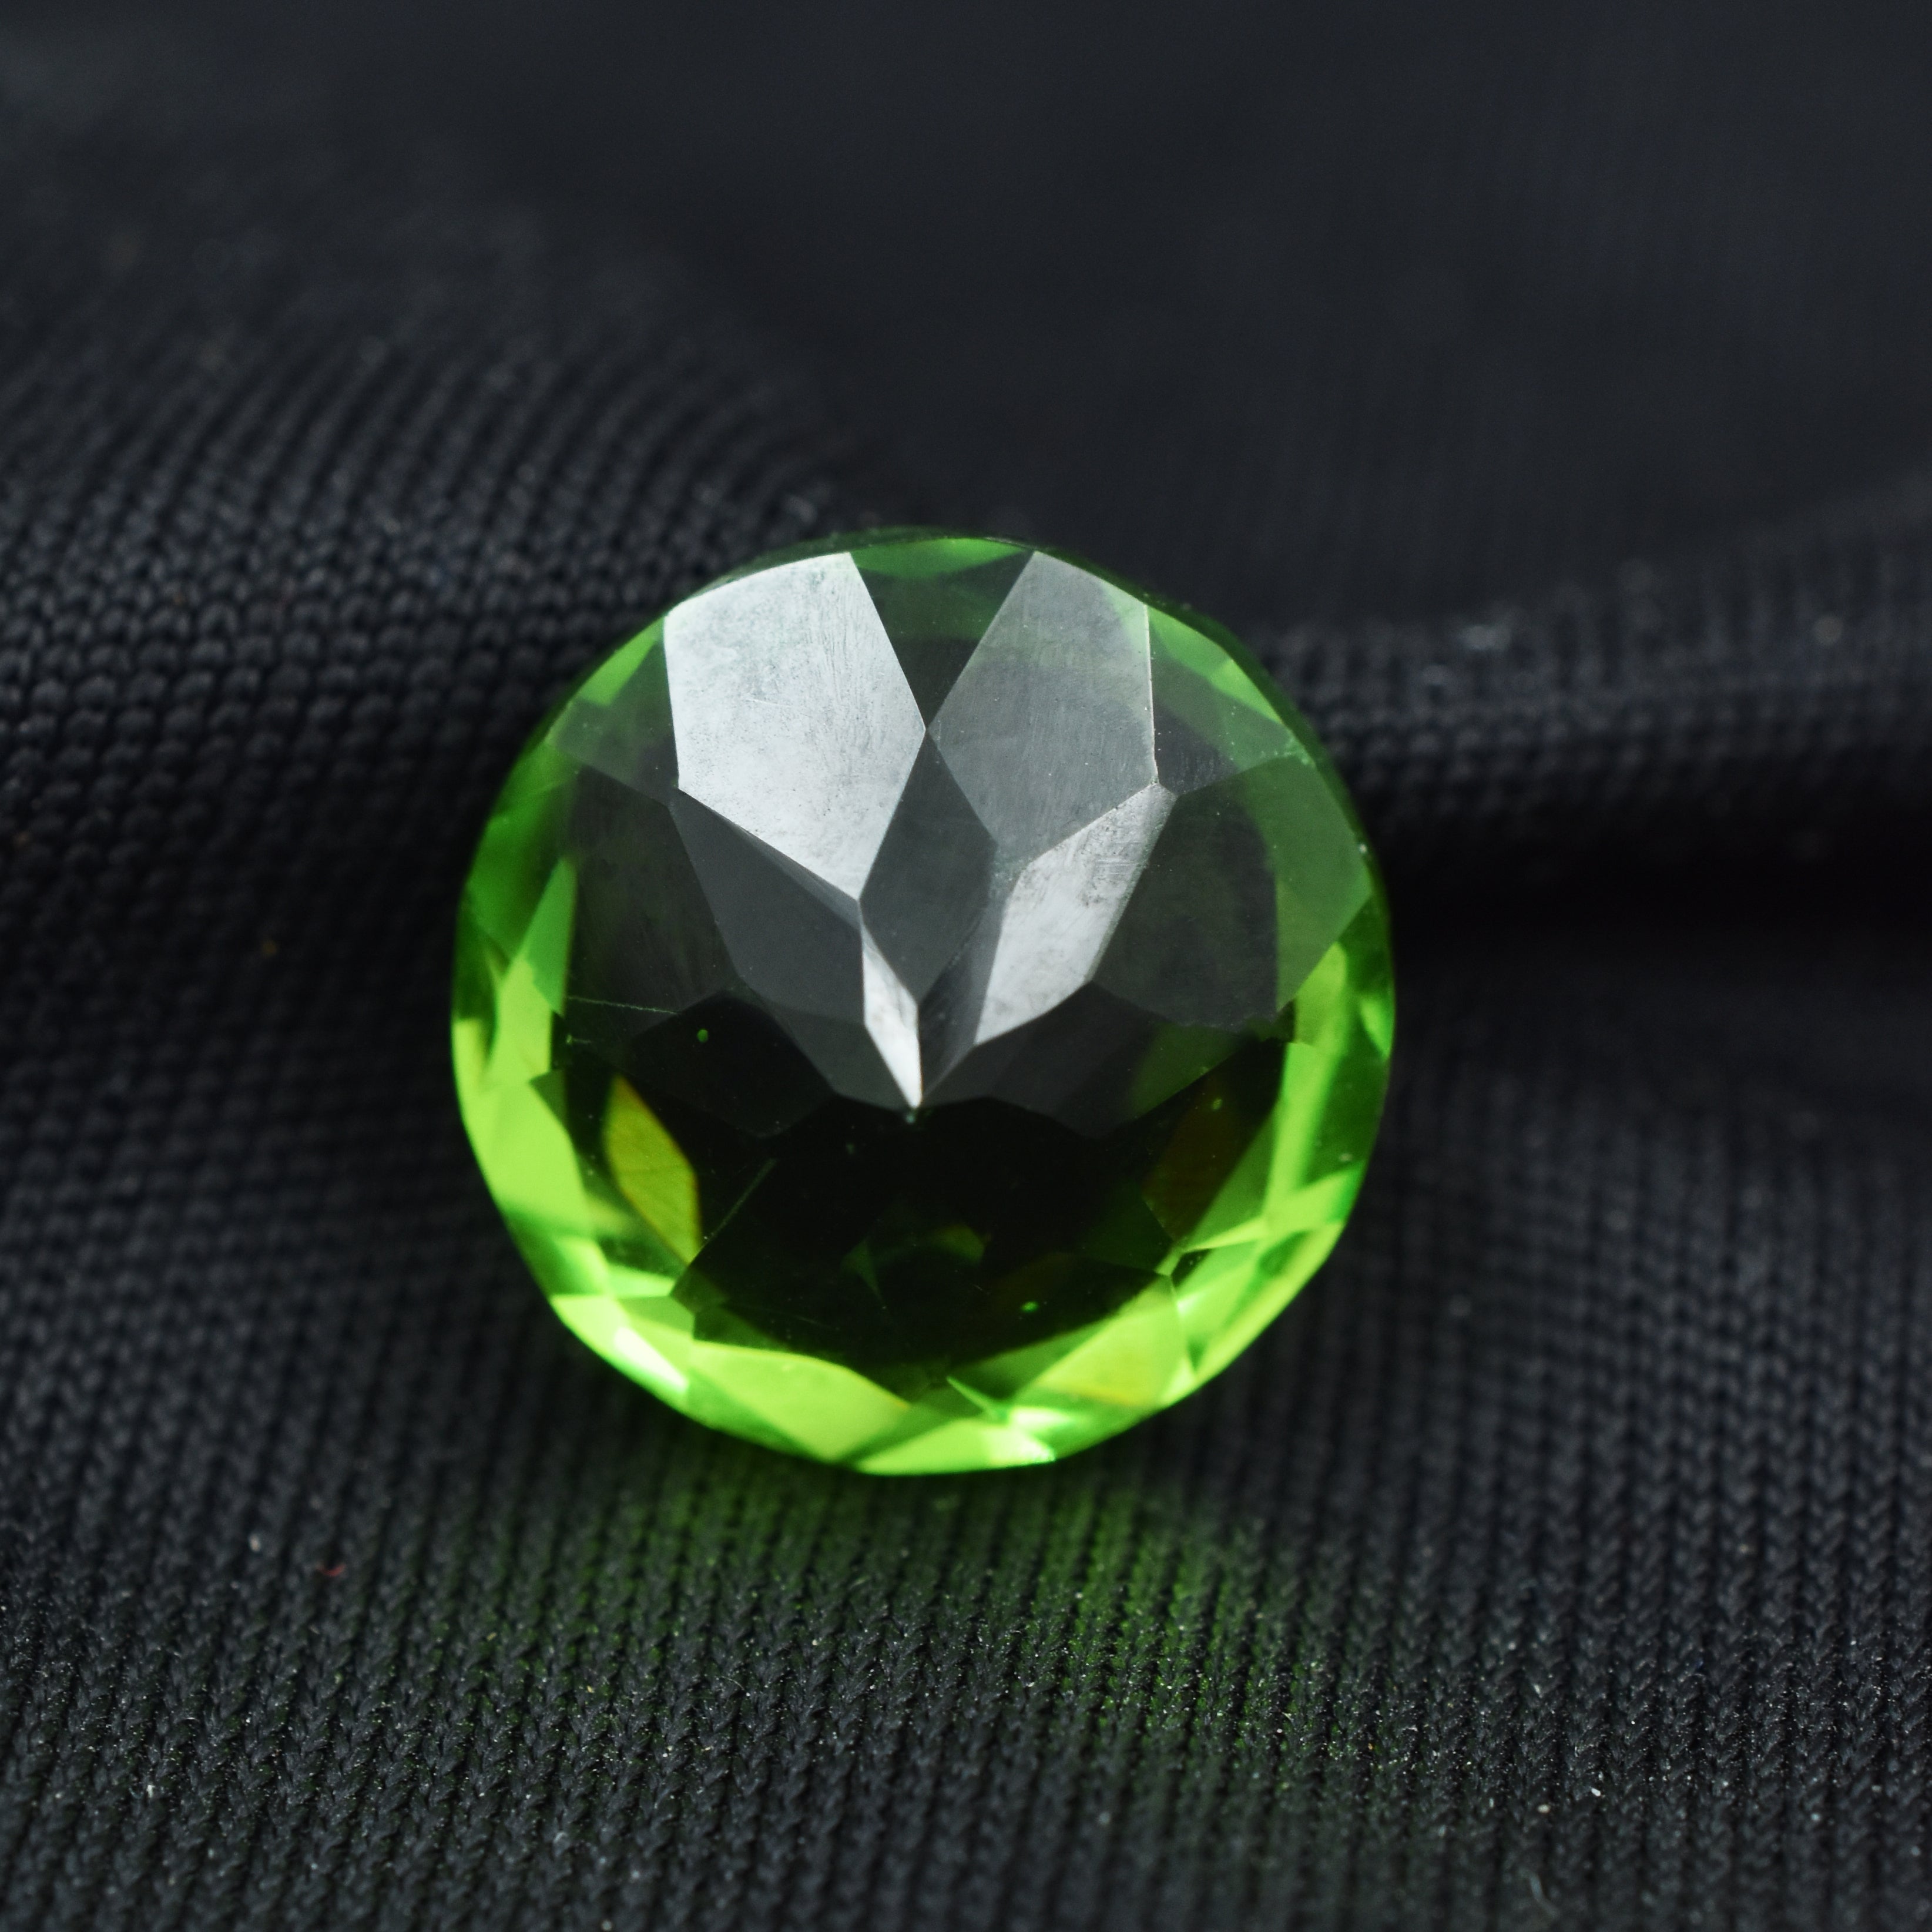 Best For Positivity & Good Luck !! Peridot Green 8.36 Carat Natural Certified Round Shape Loose Gemstone , Best Offer , Peridot Jwelery , Natural Peridot